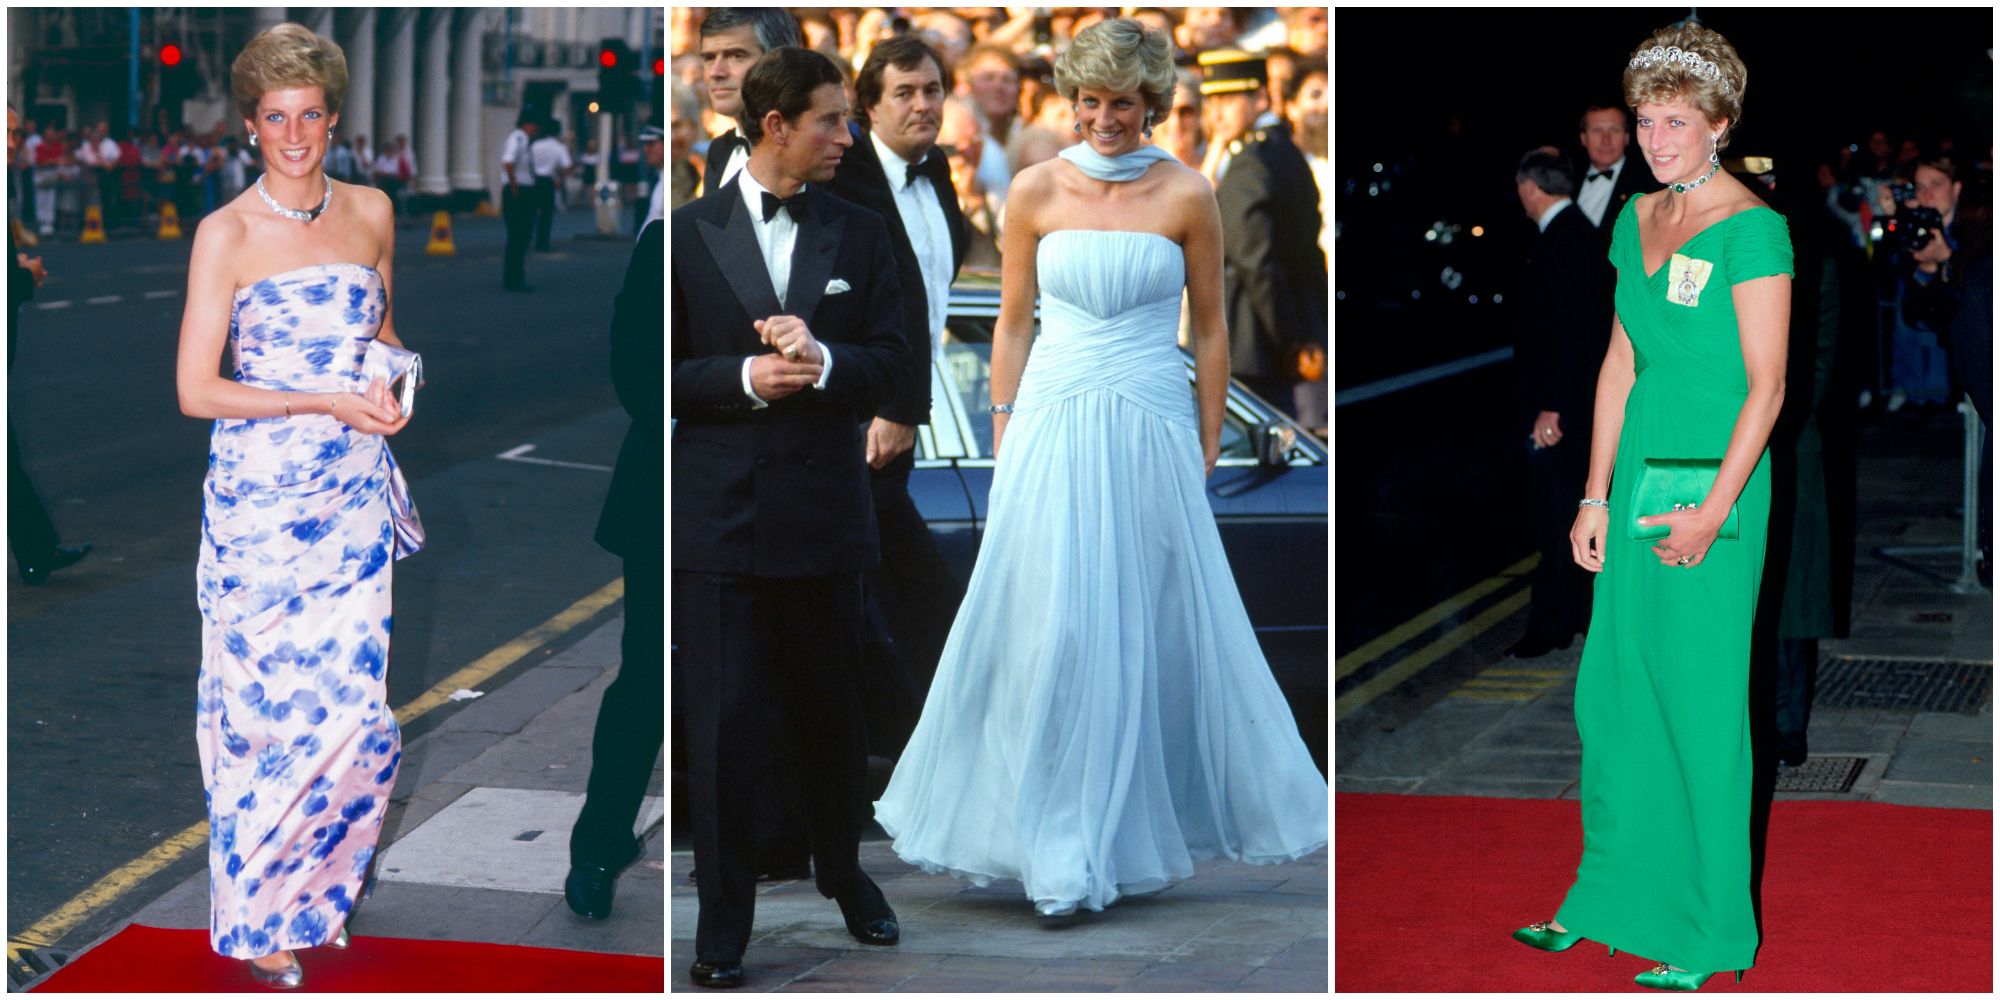 Princess Diana: See Gowns She Sold for Charity Before Death | Money